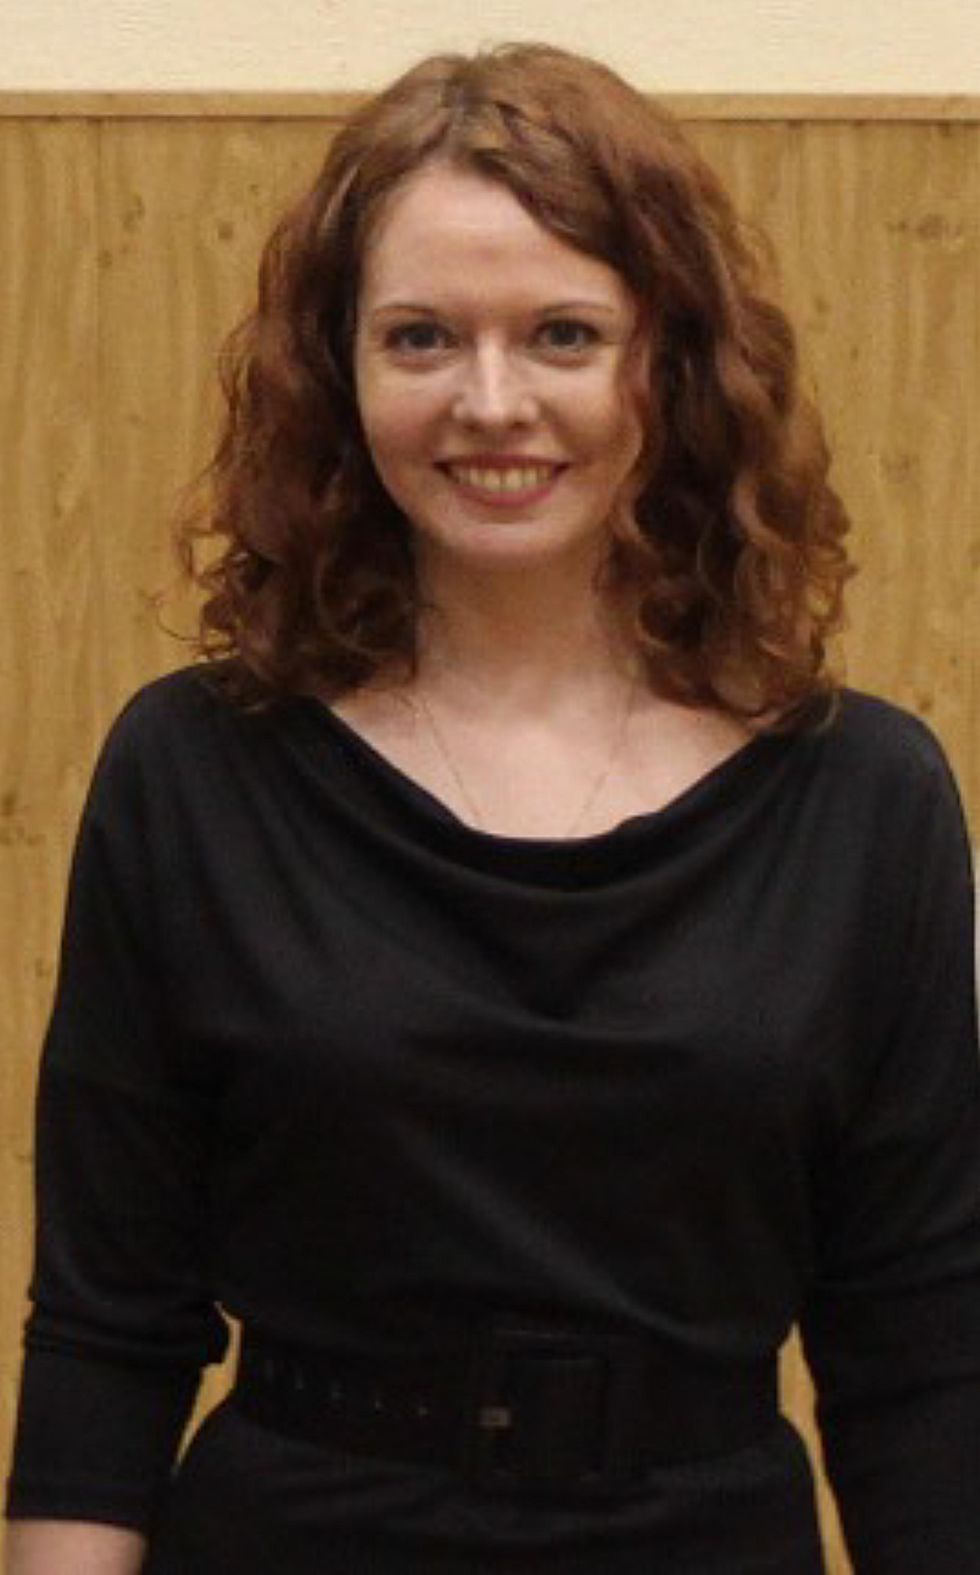 Photo of a smiling red-haired woman in a black dress